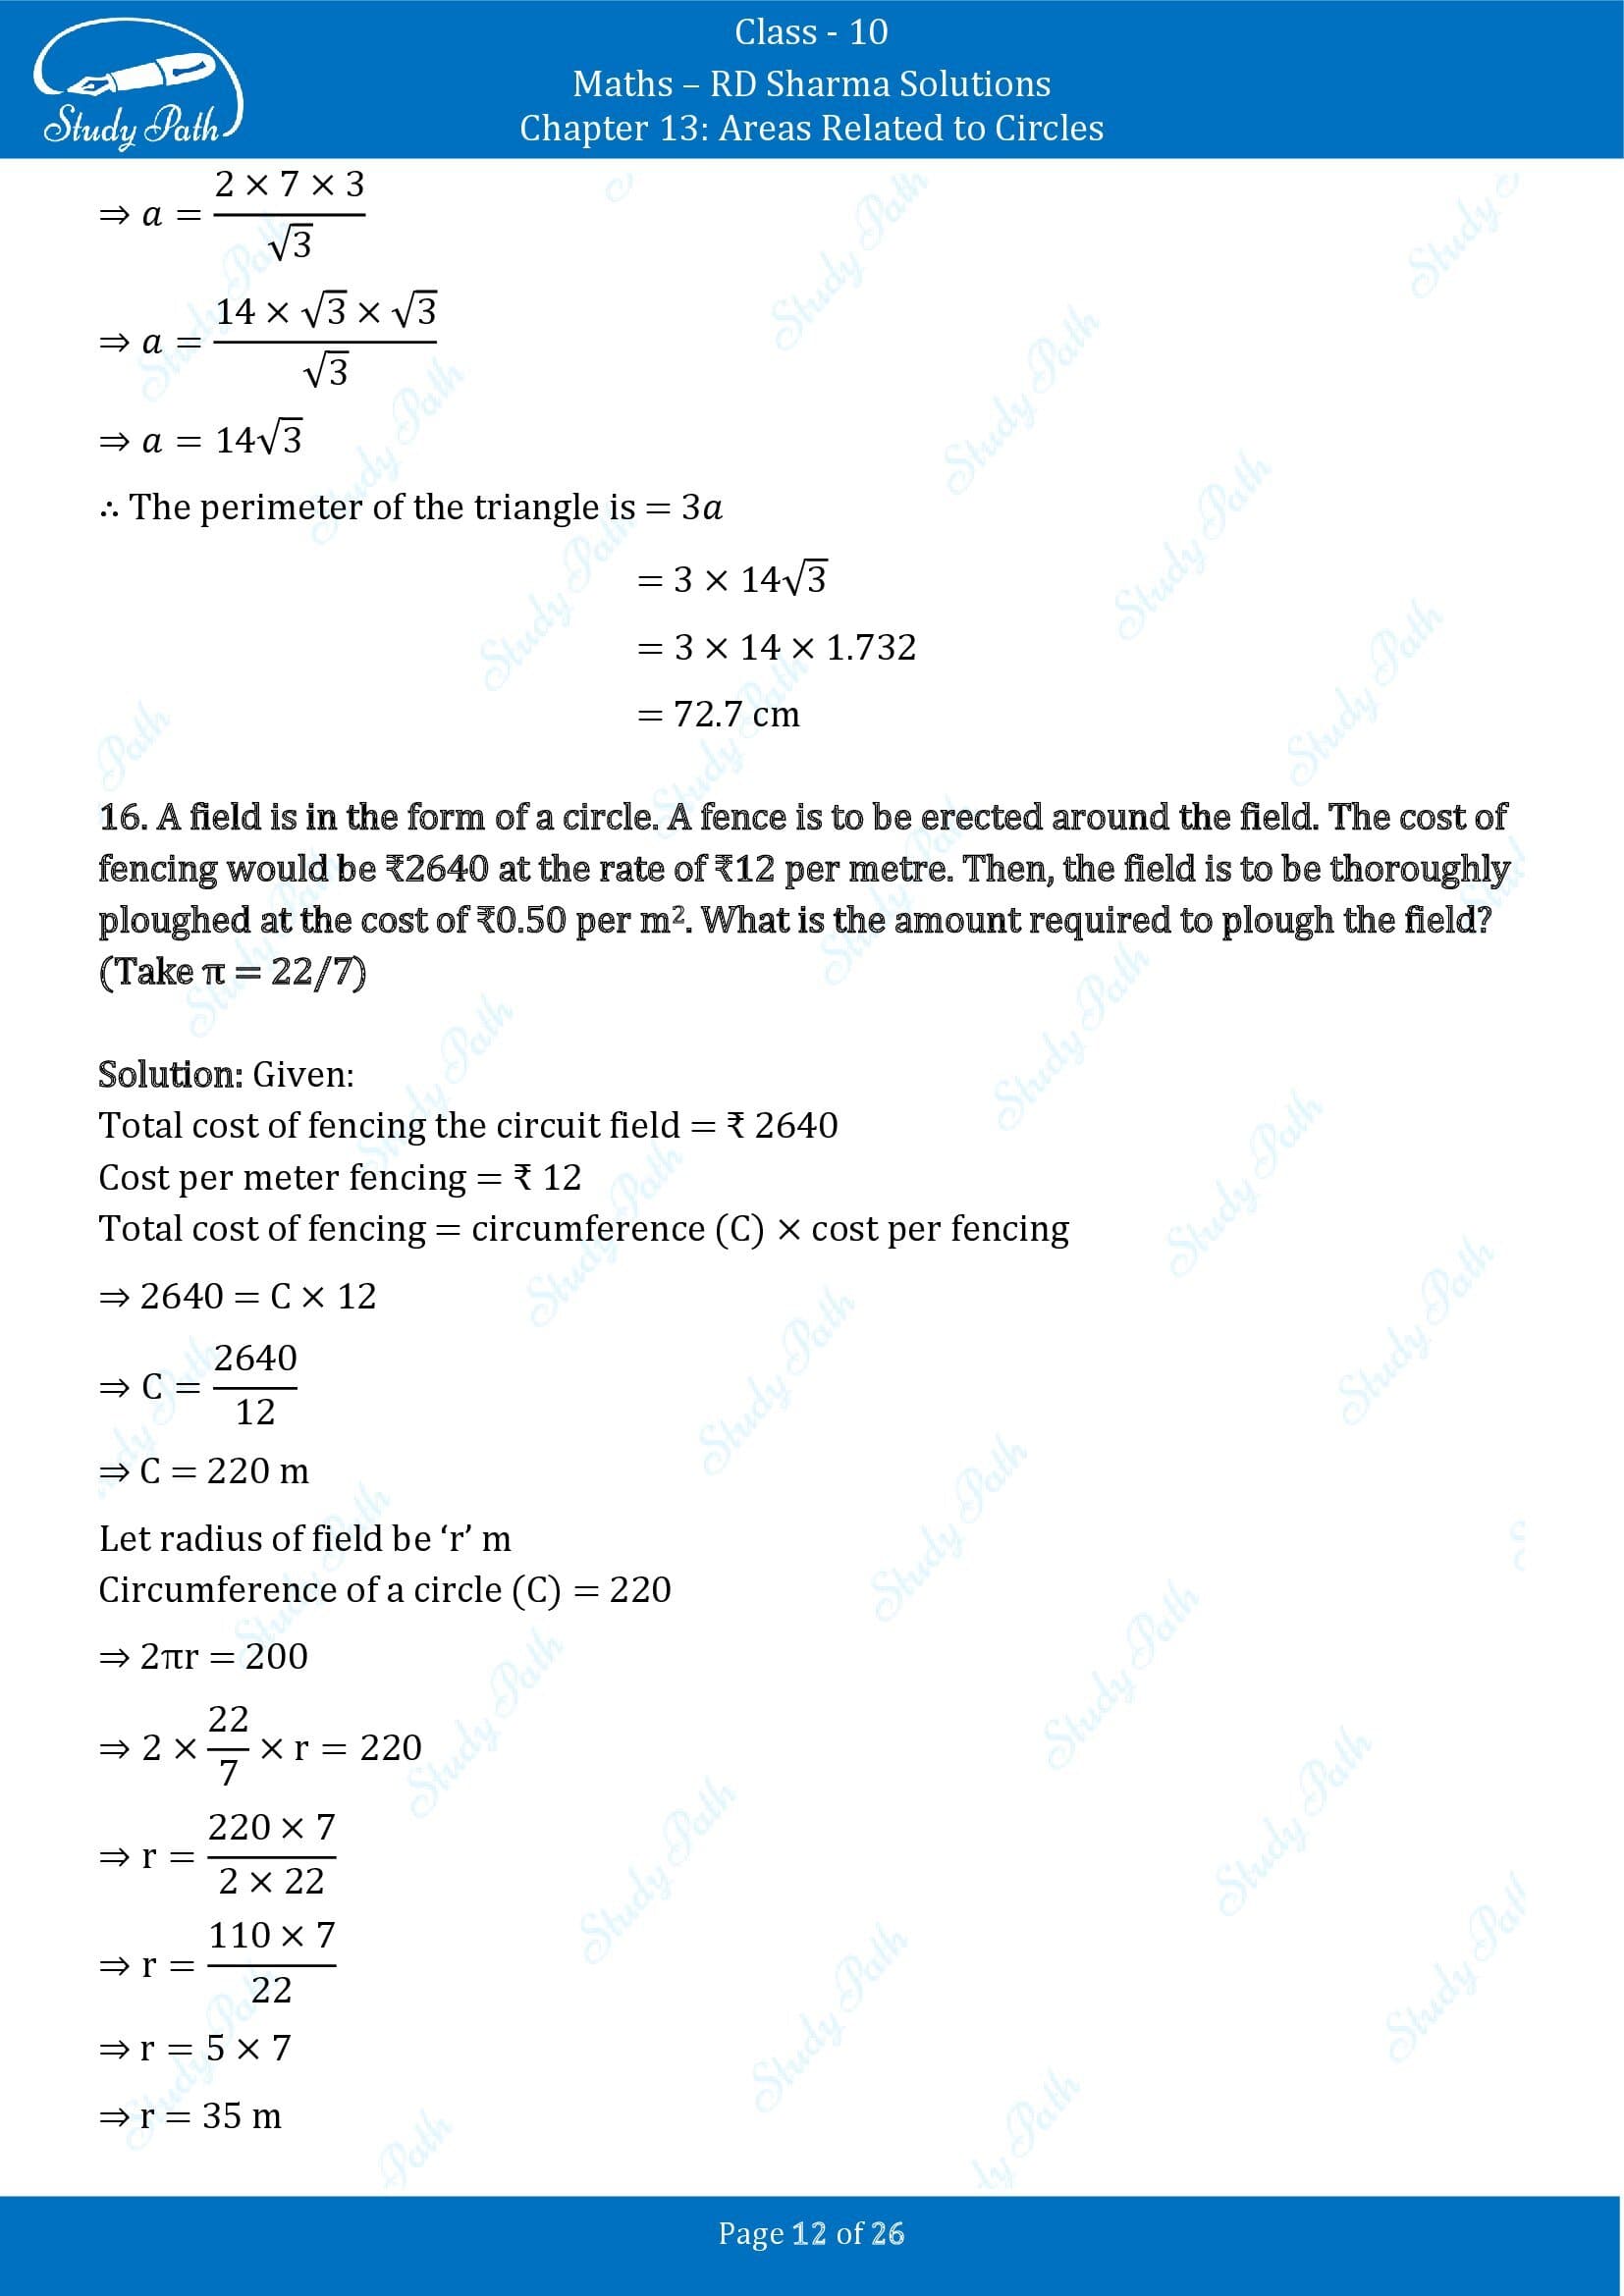 RD Sharma Solutions Class 10 Chapter 13 Areas Related to Circles Exercise 13.1 00012